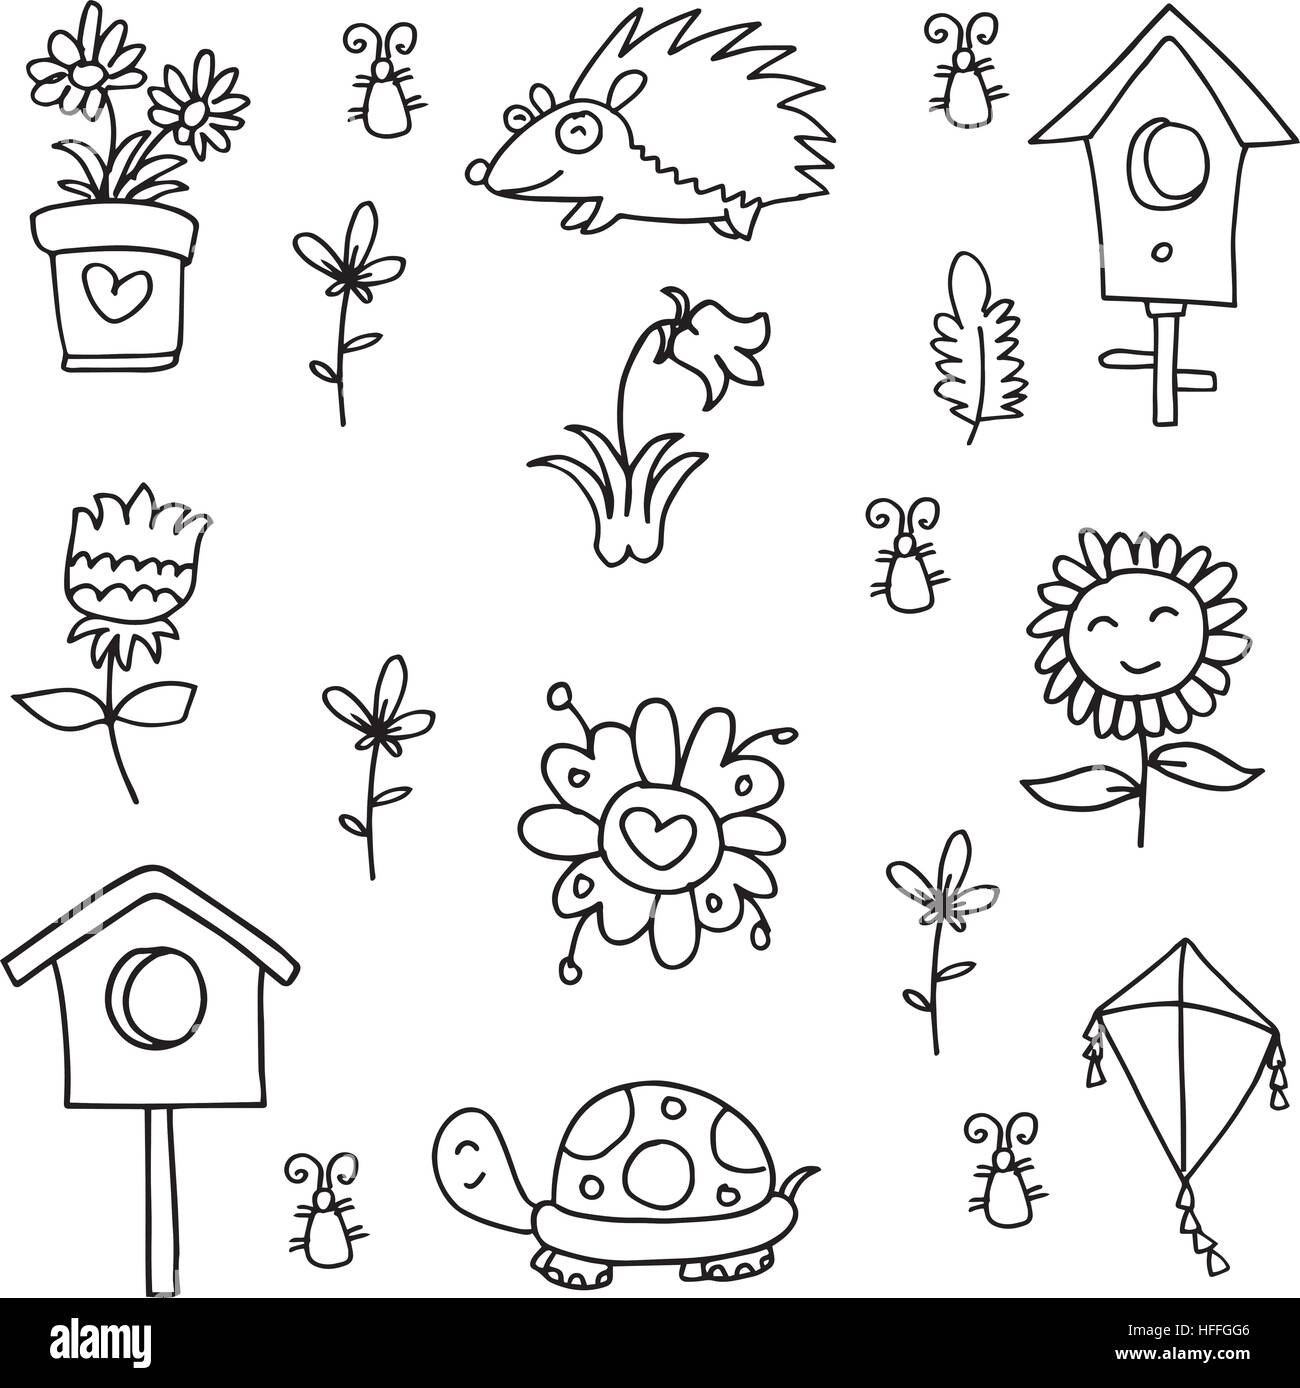 Hand draw spring of doodles Stock Vector